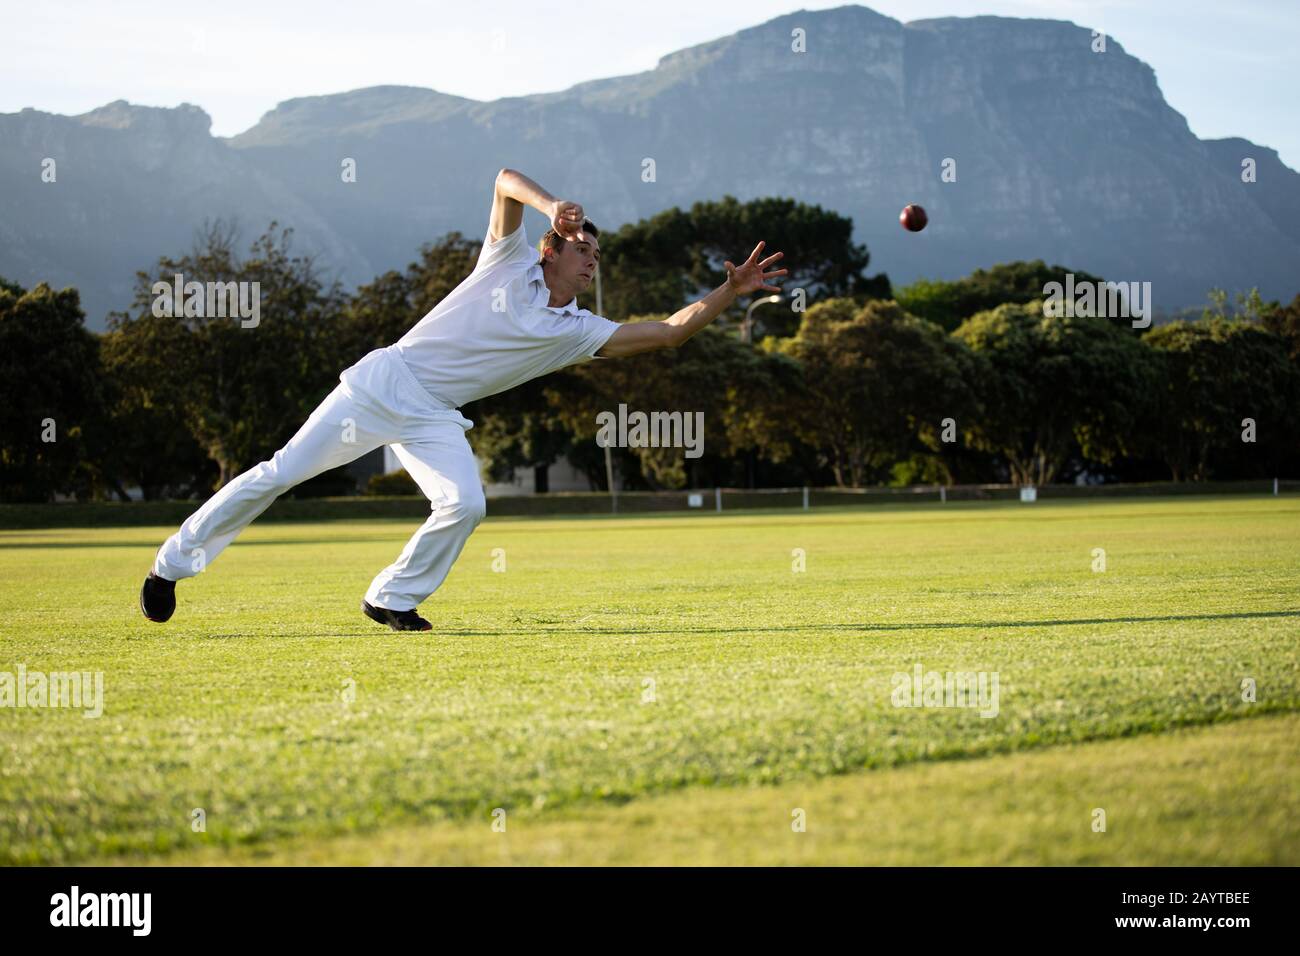 Cricket player trying to catch a cricket ball on the pitch Stock Photo